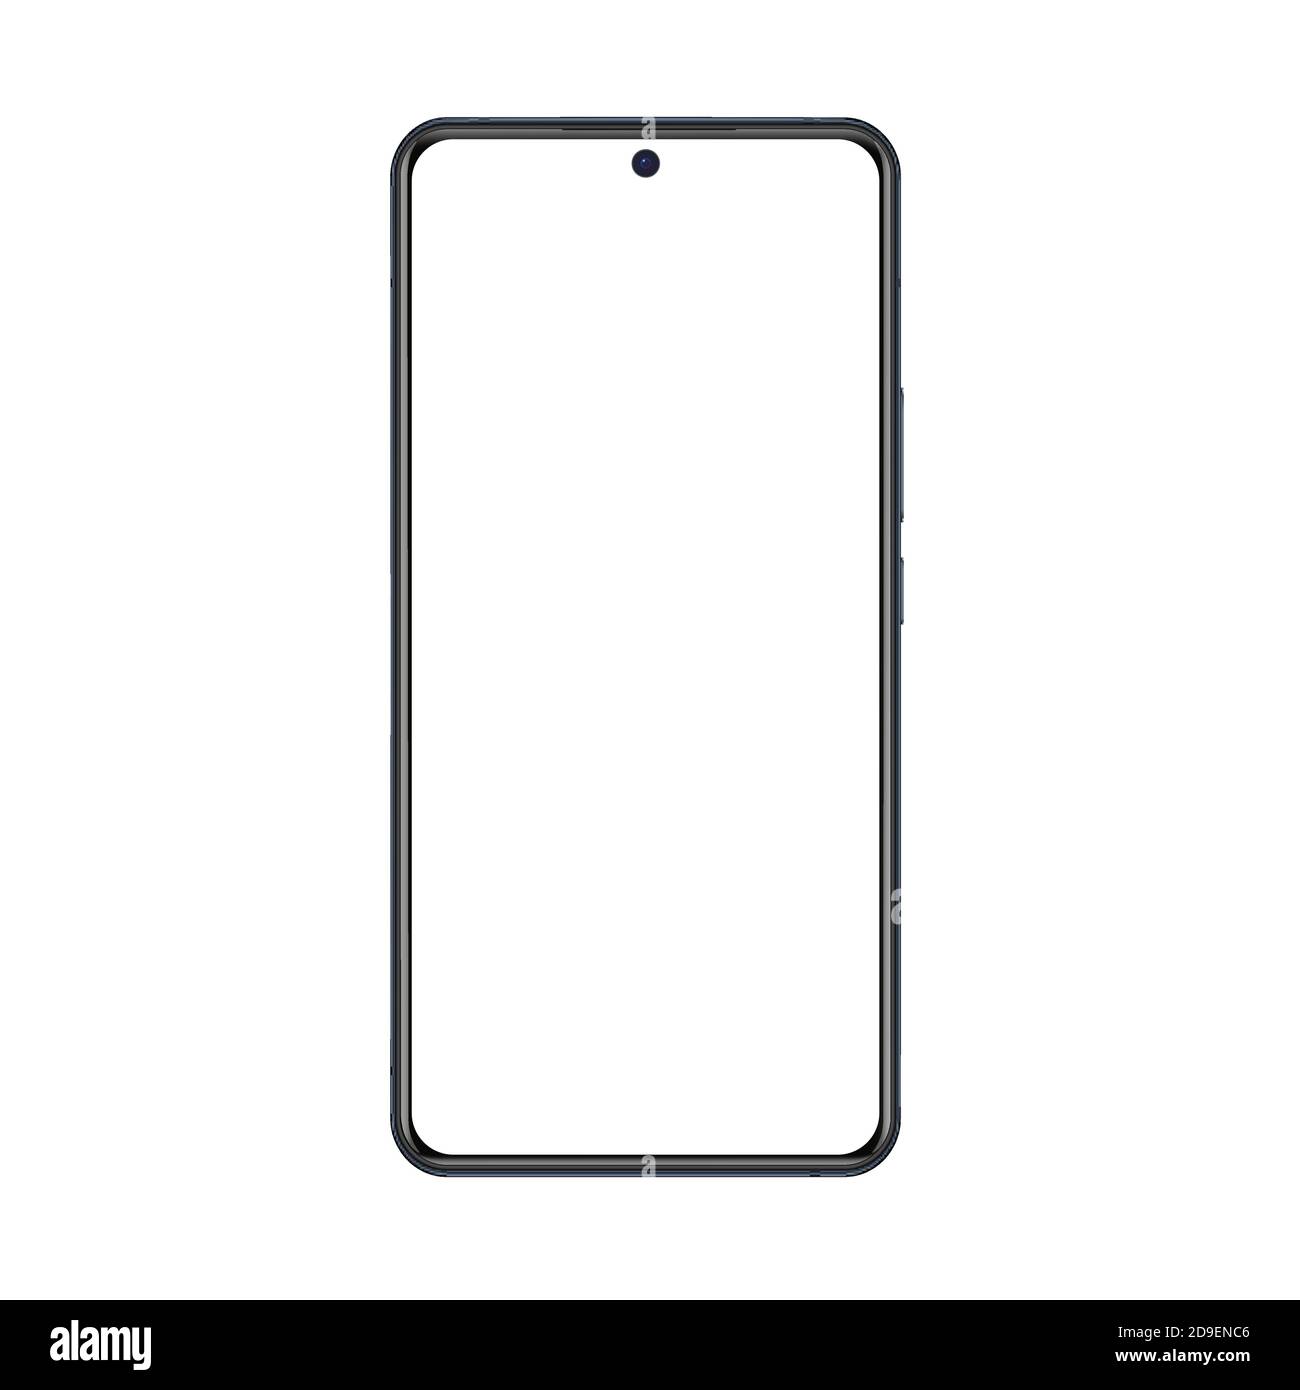 Phone mockup vector illustration. Realistic cellphone with black frame and white blank screen for web app, smartphone for presentation of application and mobile communication isolated on white Stock Vector